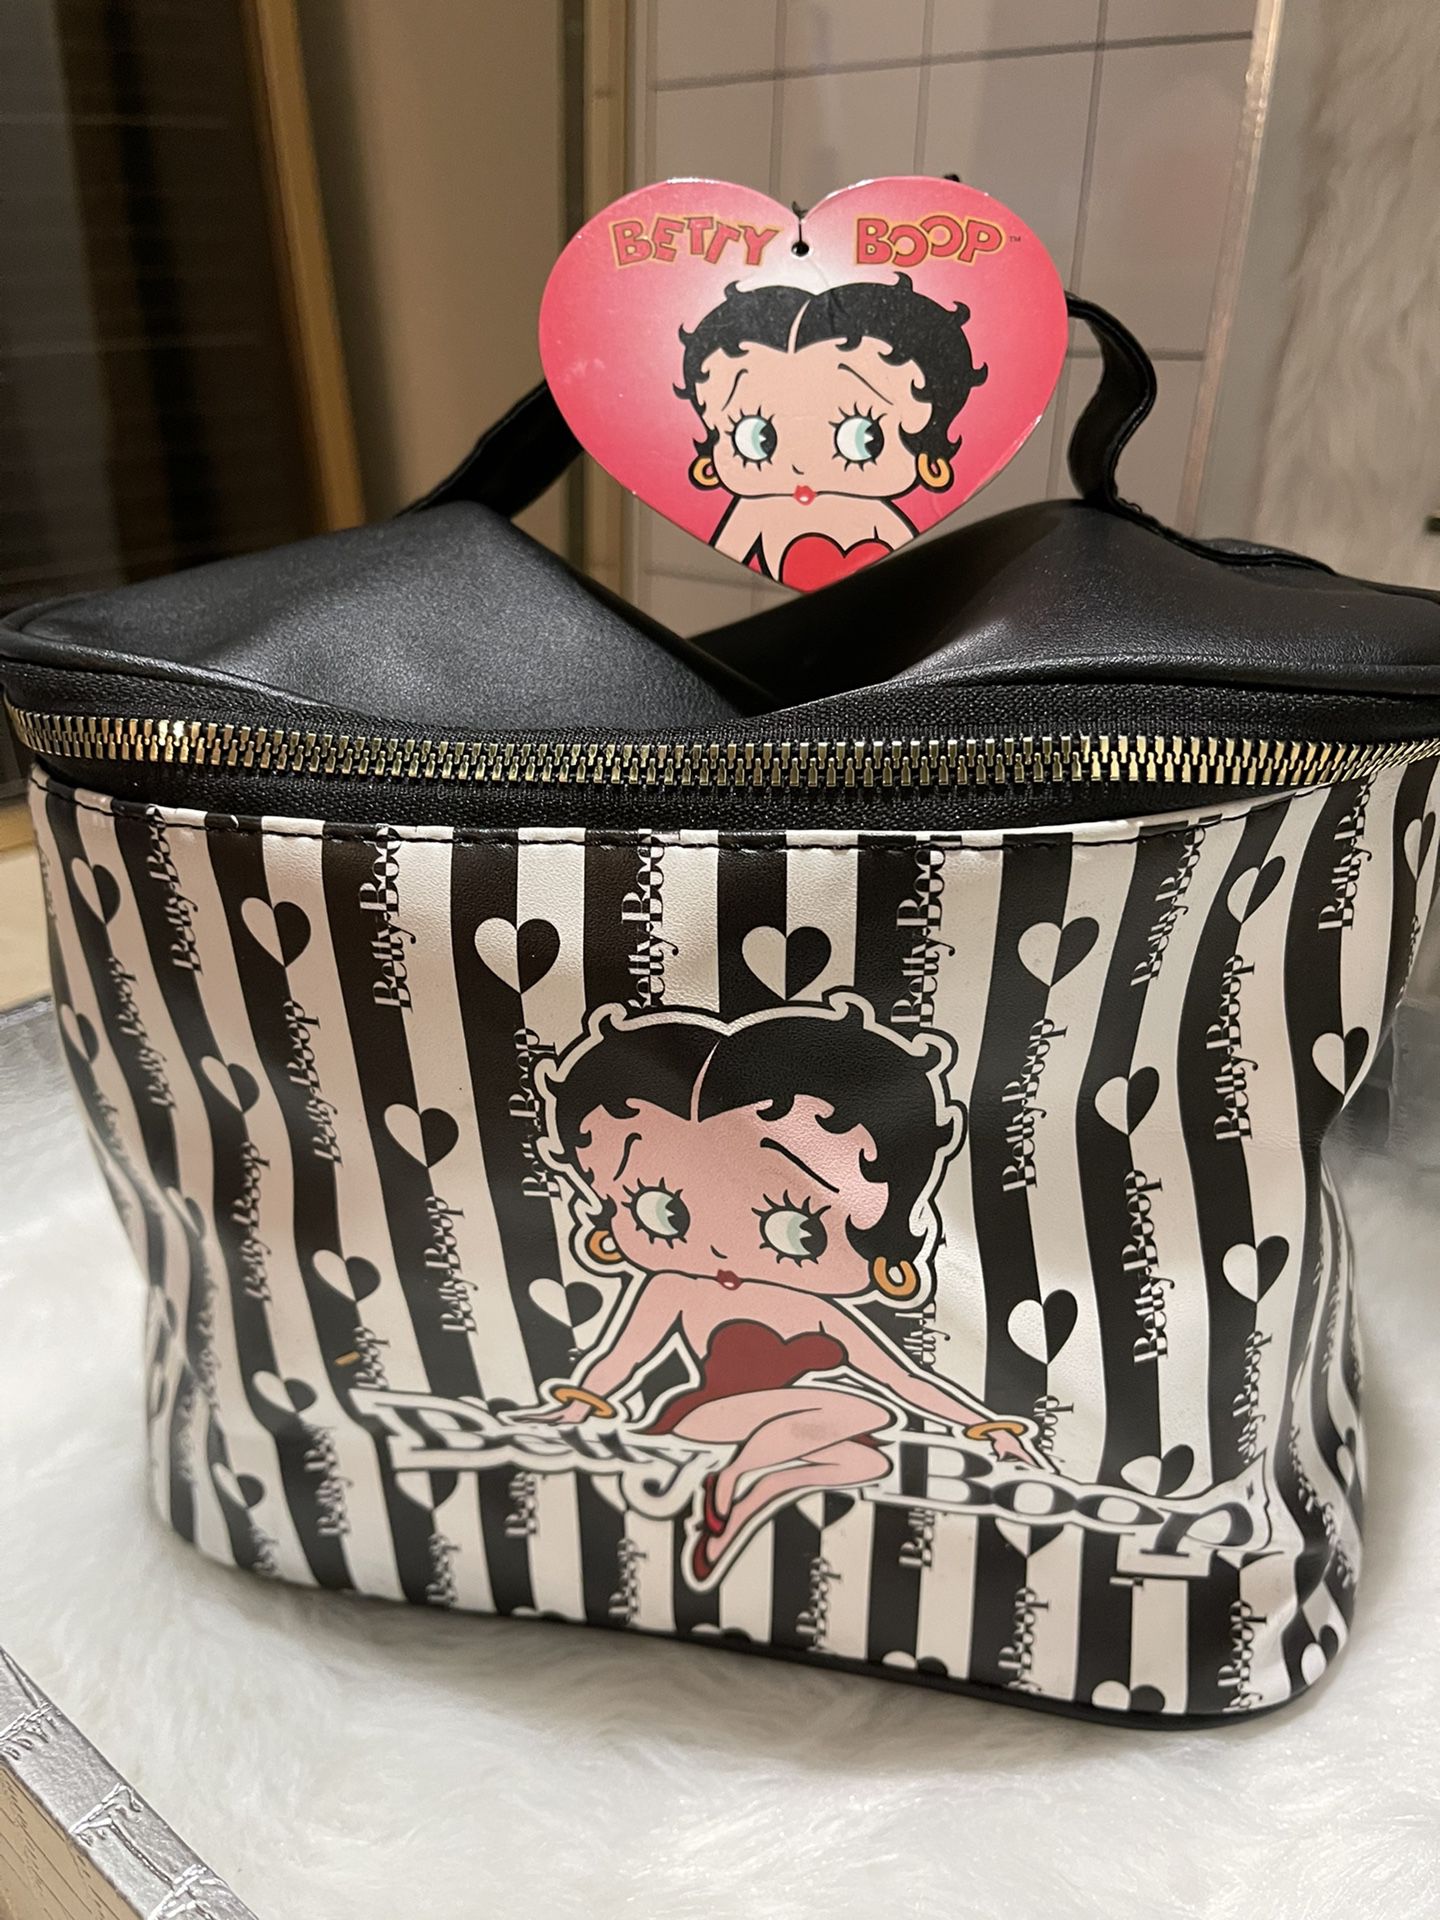 Betty Boop Cosmetics Case Never Used